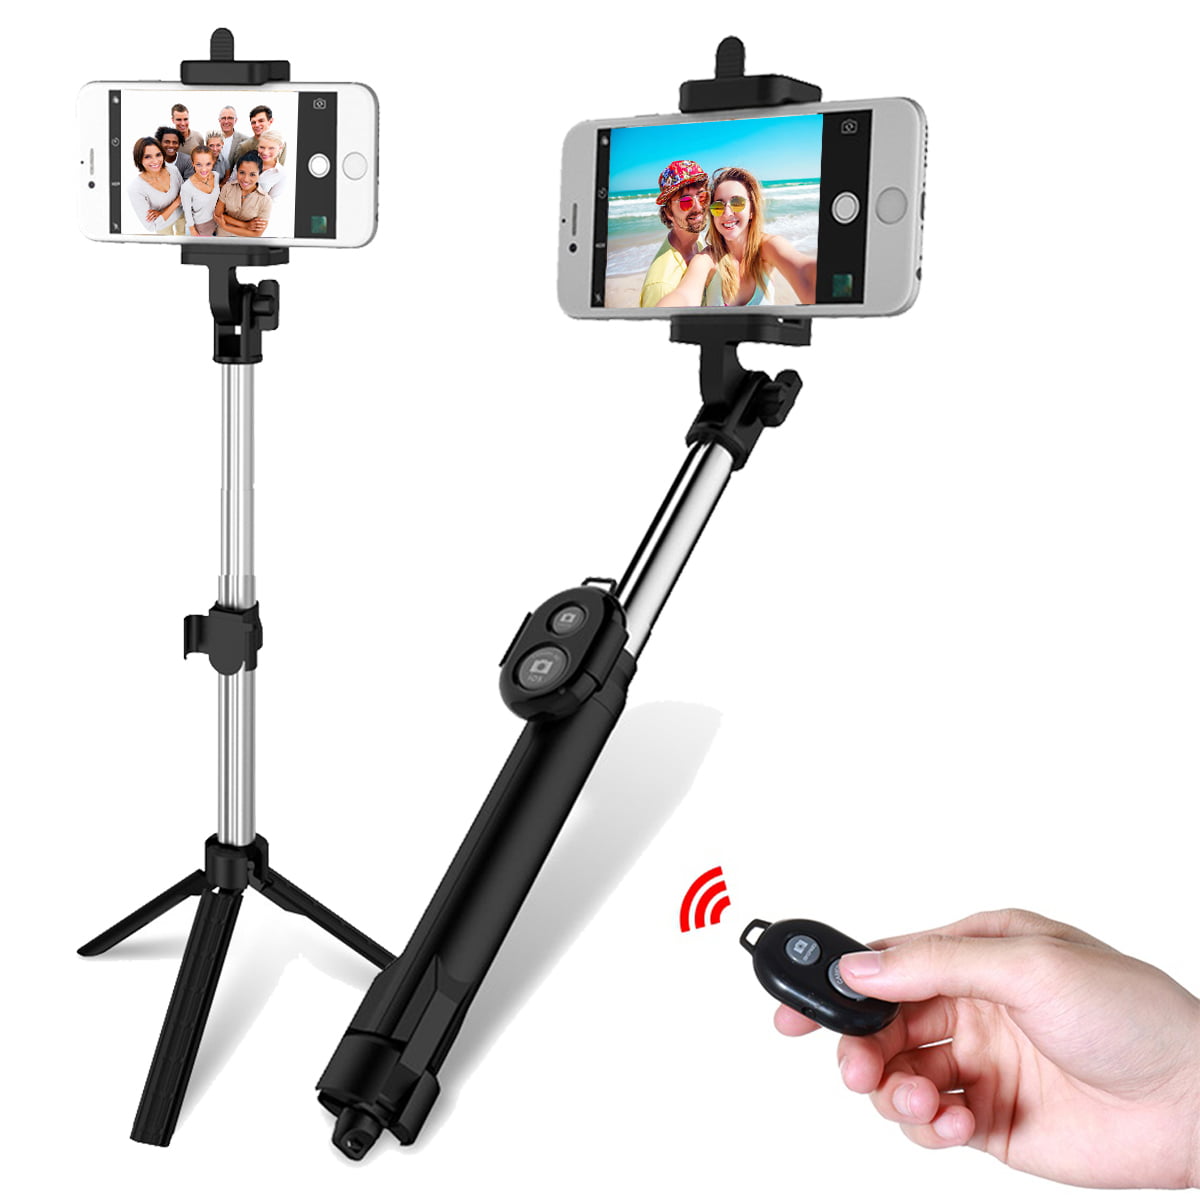 Android and Tablets WHITE Wireless Bluetooth Remote Shutter Control with Camera Activation used with Monopod Selfie Stick for Apple iPhone 6 Plus Iphone 5 4 iOS